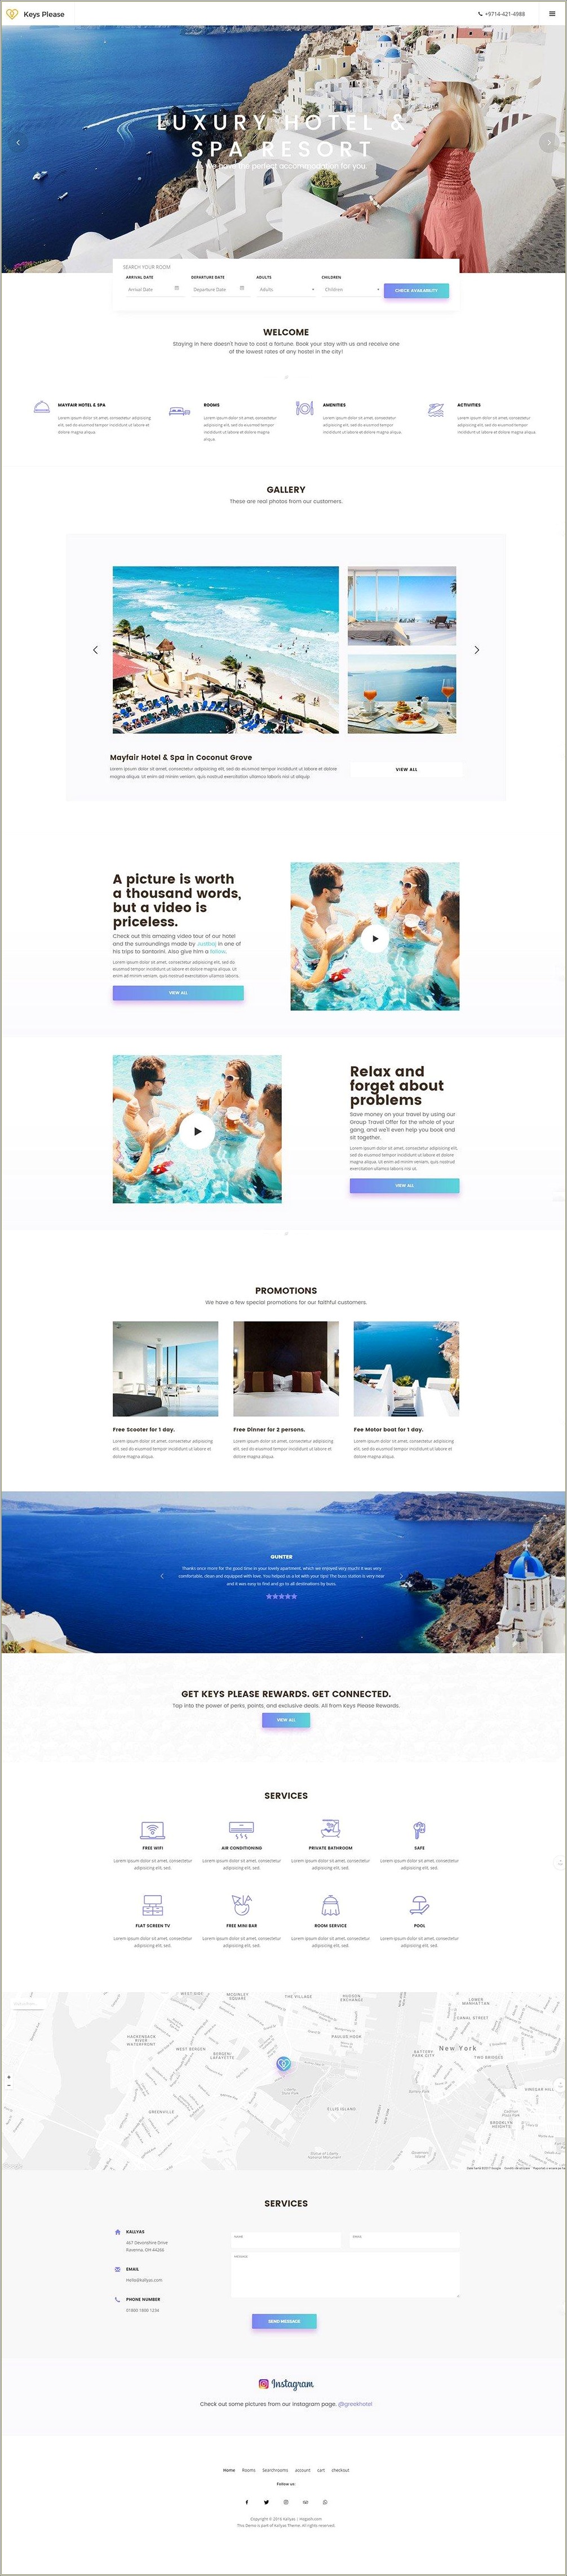 Free Hotel Psd Web Templates Download